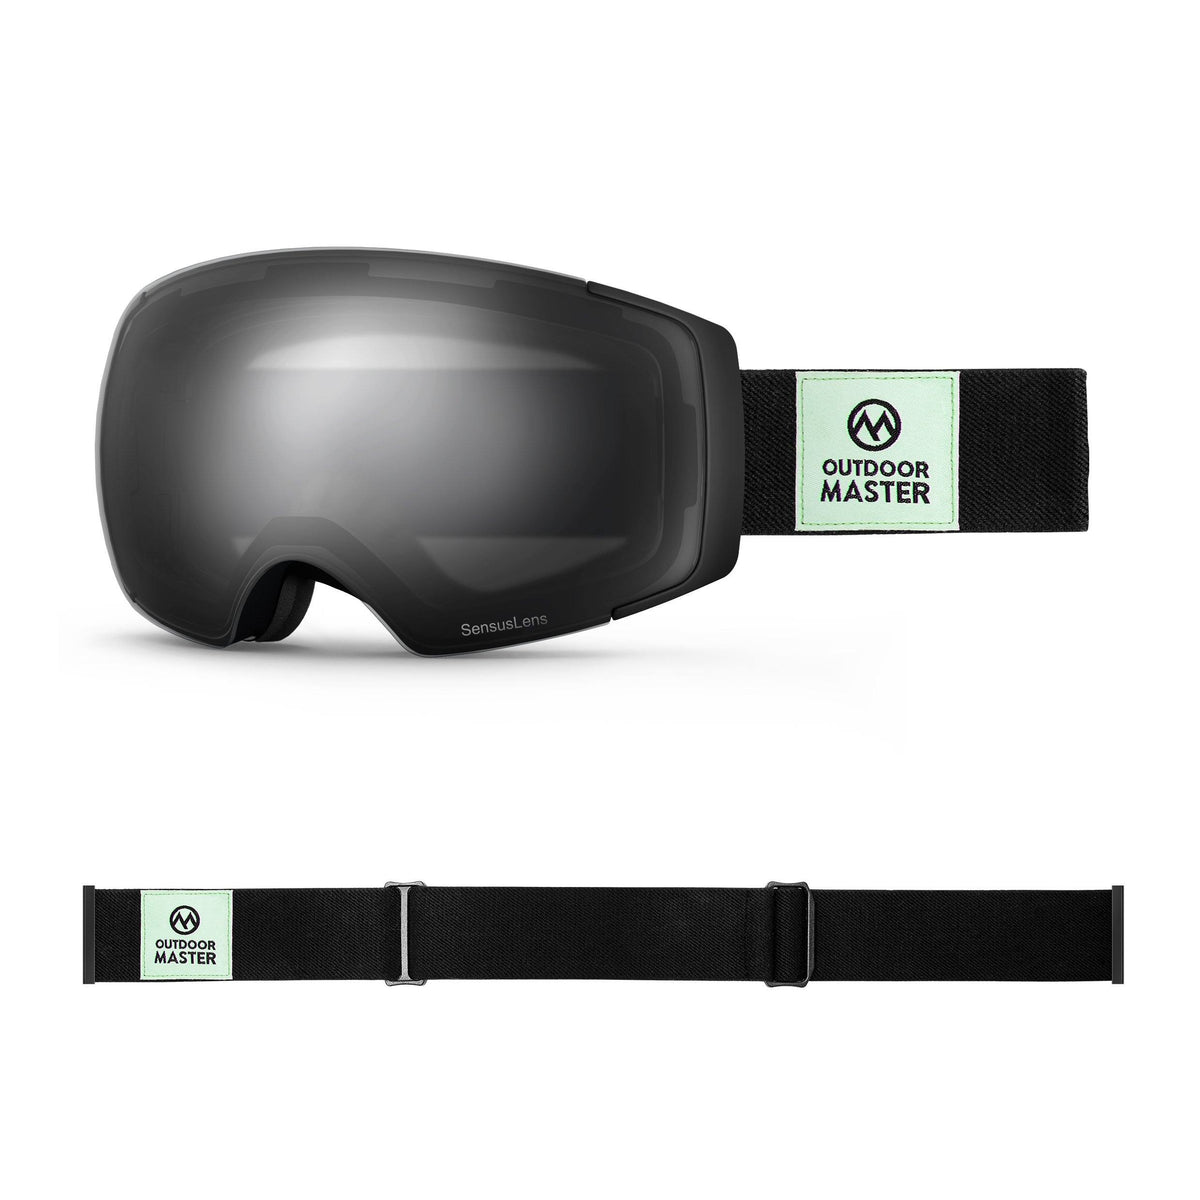 Eco-friendly Ski Goggles Pro Series - The Disappearing Places/Classic BambooStraps Limited Edition OutdoorMaster SensusLens VLT 13-60% From Light to Dark Grey Classic BambooStraps